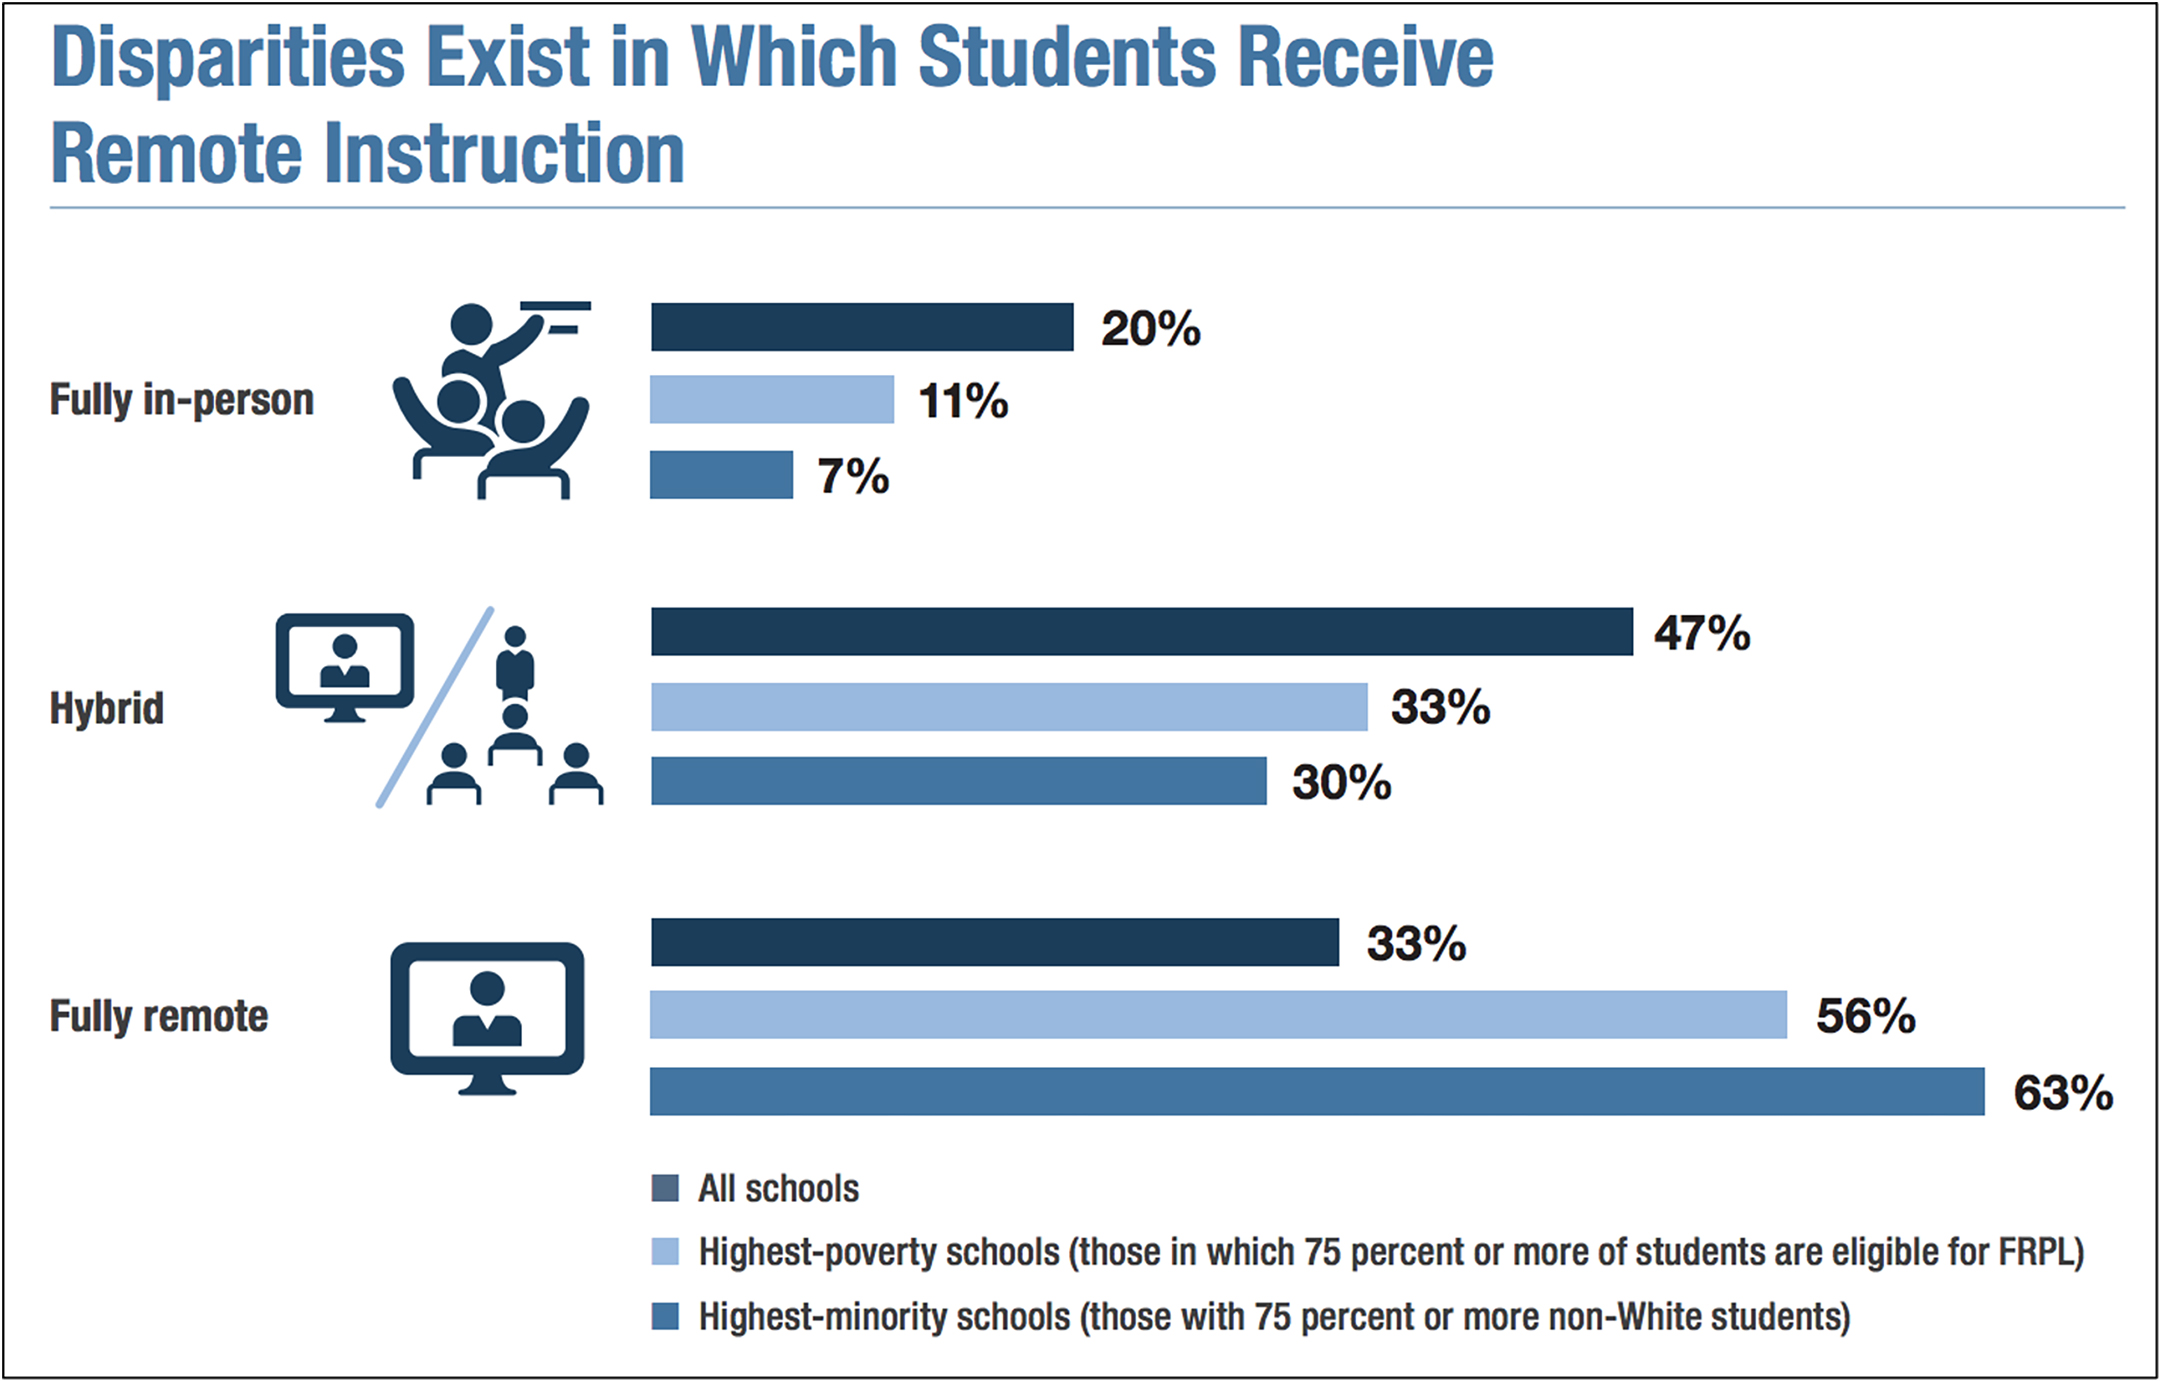 a bar chart, titled Disparities Exist in Which Students Receive Remote Instruction, shows data on how students attend school in the pandemic: fully in-person, hybrid, or fully-remote